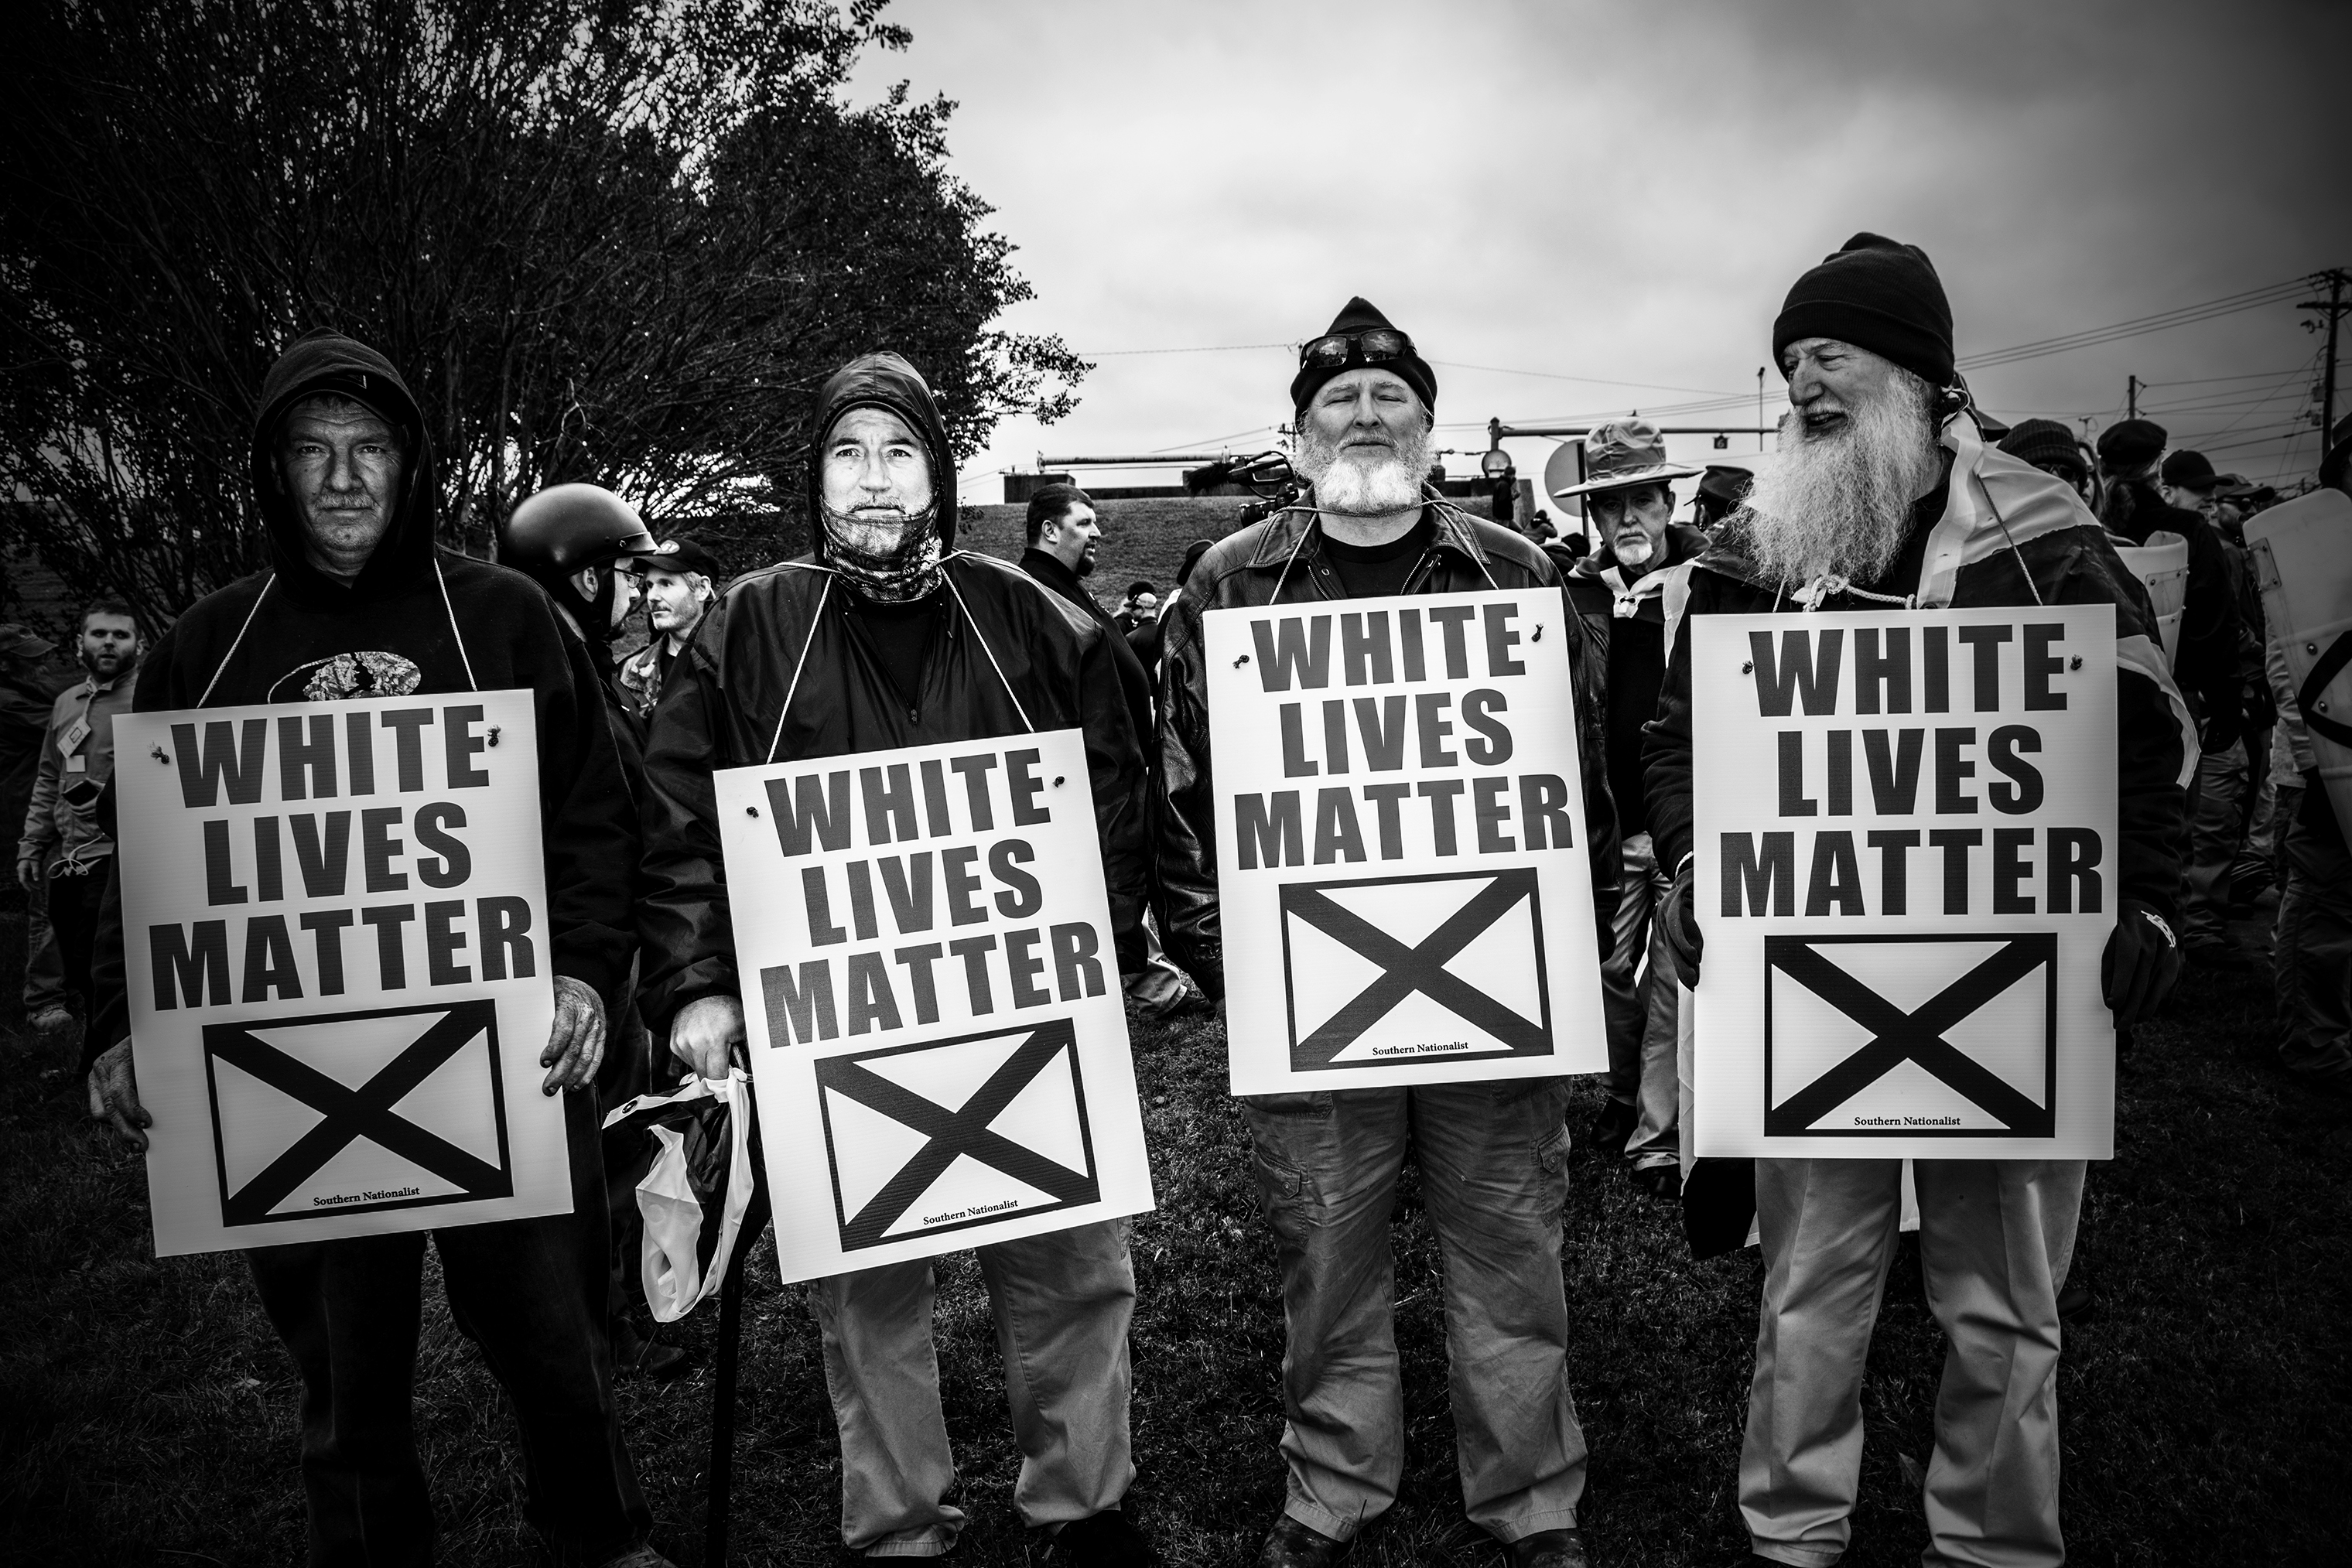 Members of the white supremacist organization League of the South, wear 'White Lives Matter' signs during a rally in Shelbyville, Tenn., on Oct. 28, 2017. (Mark Peterson—Redux)